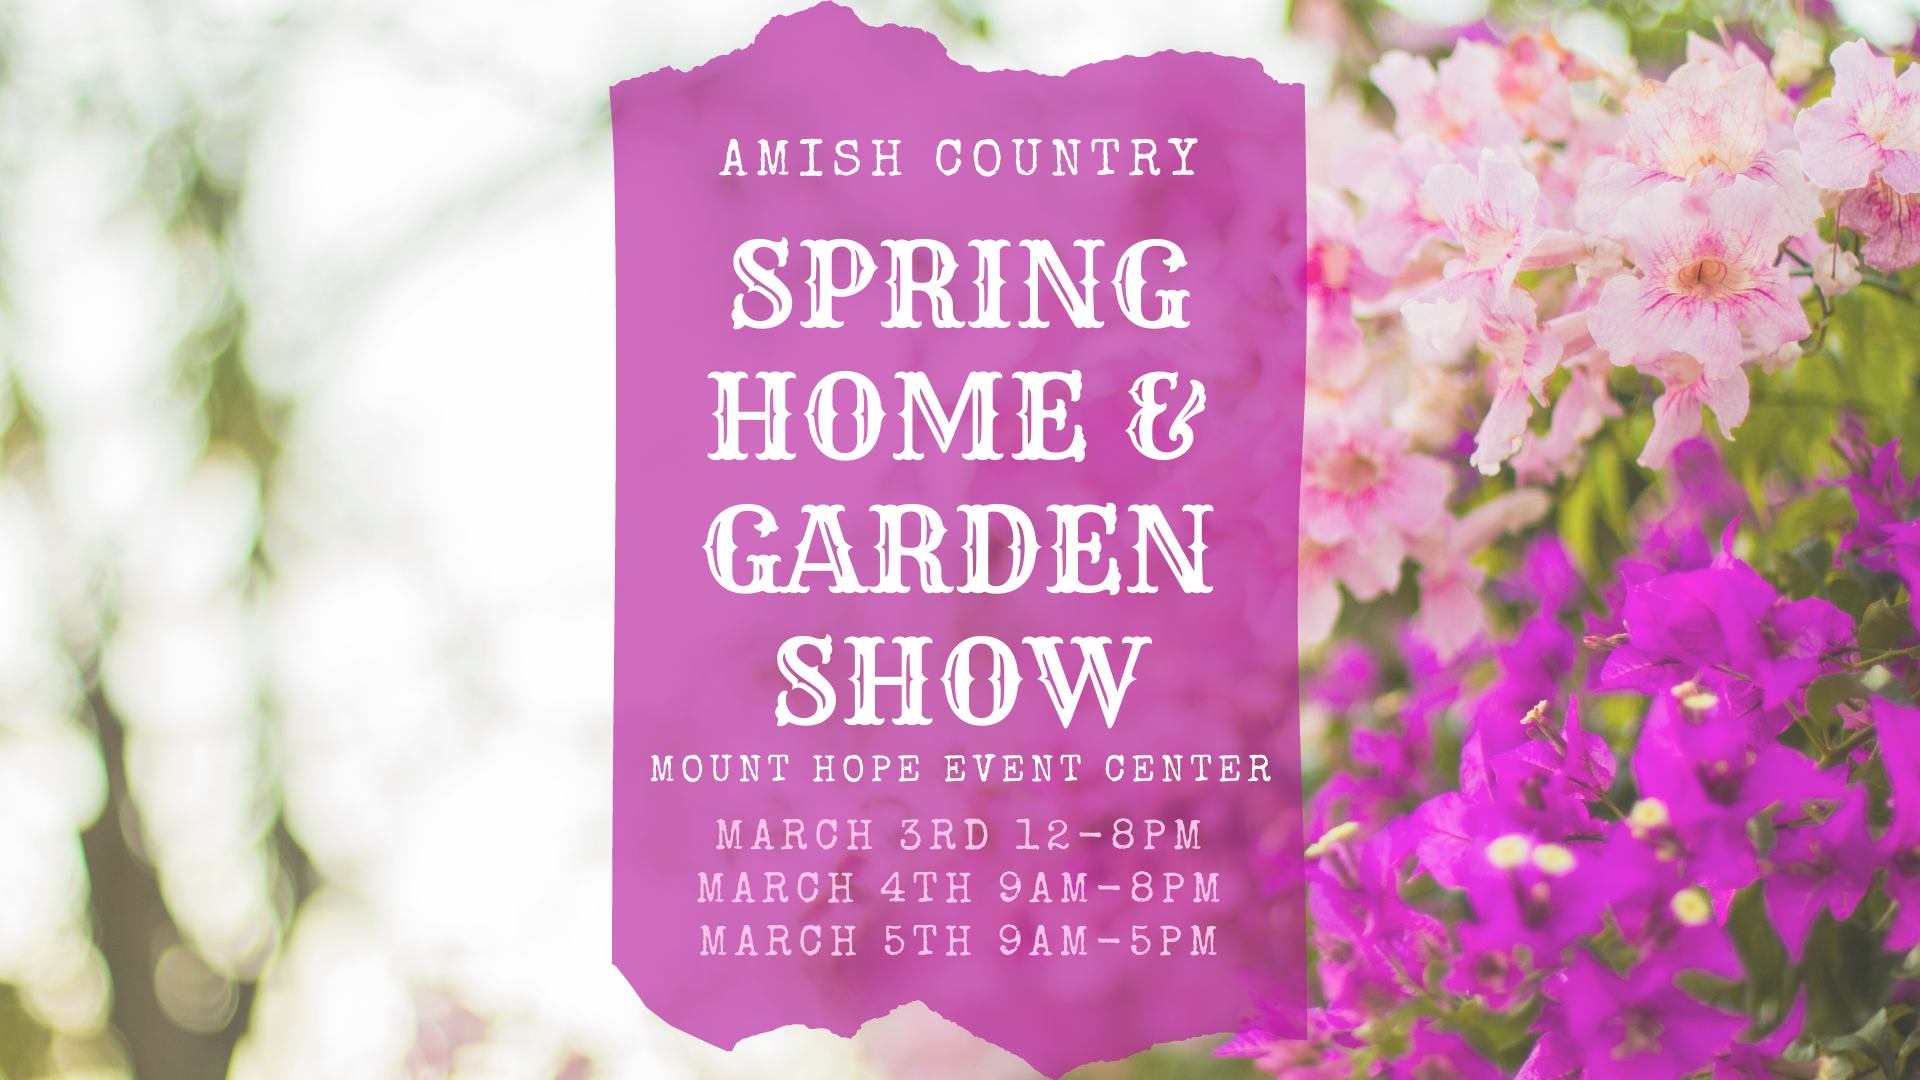 Learn more about the Mt Hope Amish Home and Garden show